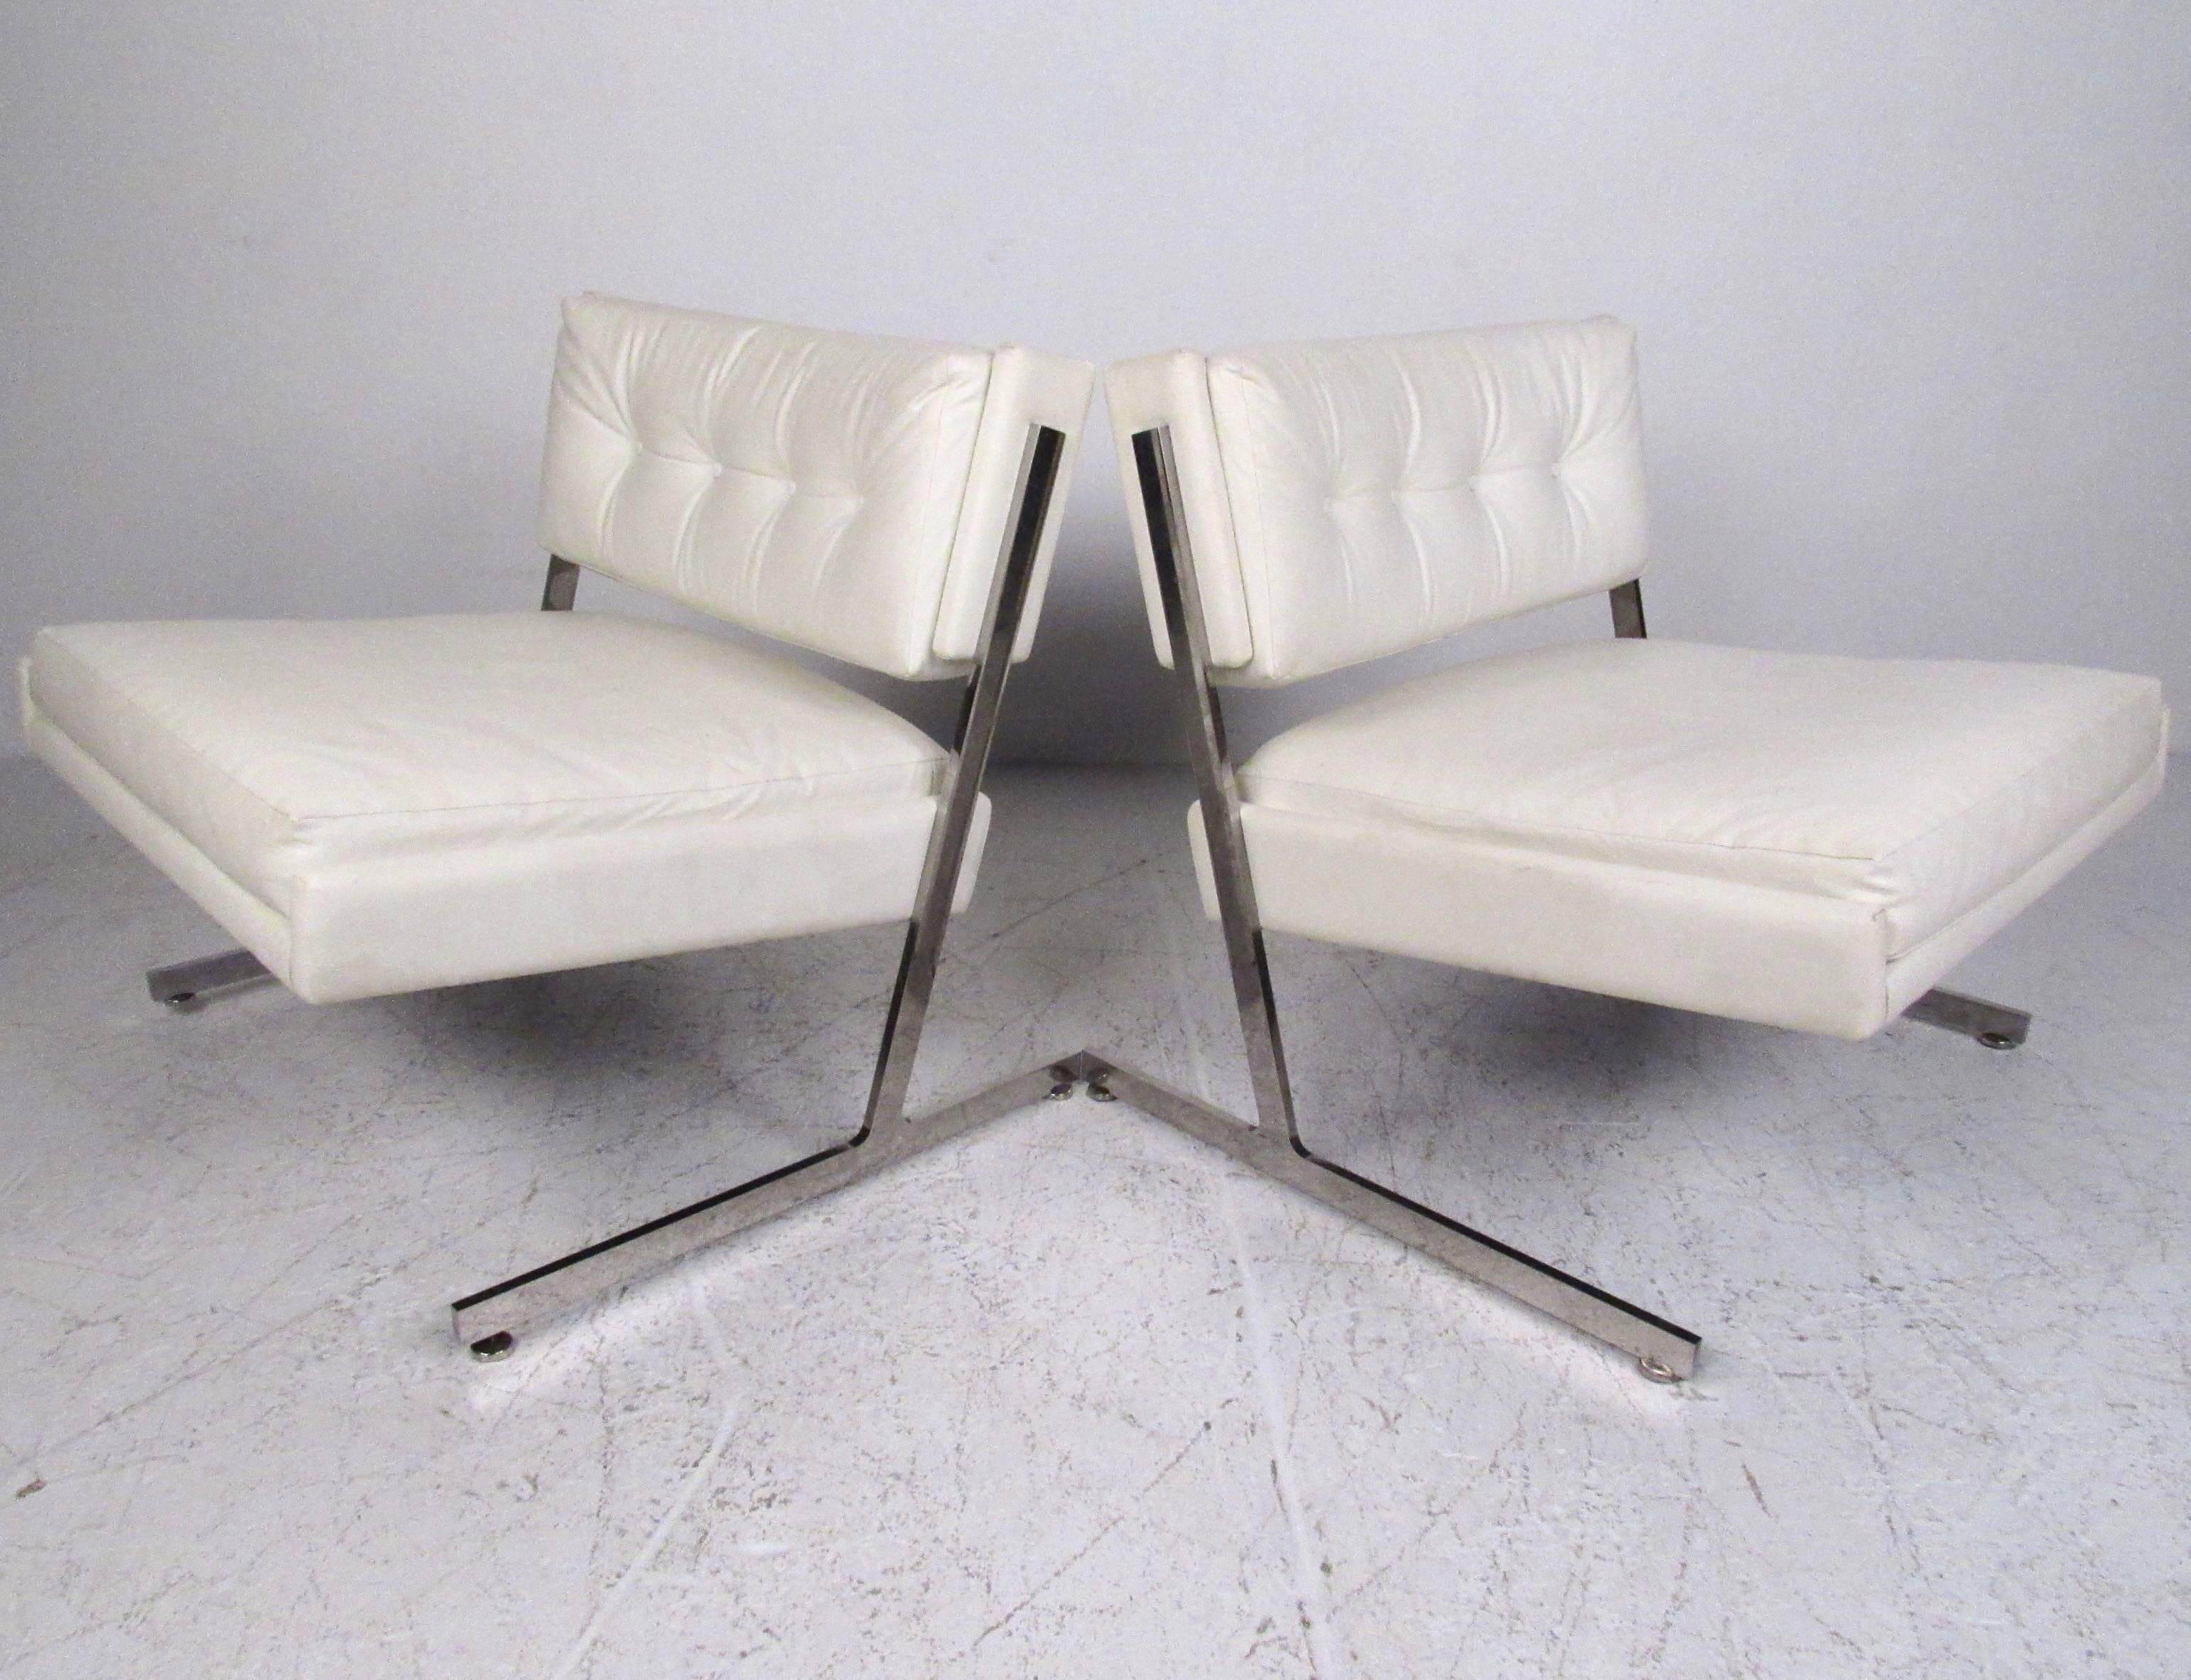 This stunning pair of modern lounge chairs by Harvey Probber feature tufted vinyl seat backs with wide slipper seats. Cantilevered heavy chrome frame makes for an impressive mid-century addition to any seating arrangement. Please confirm item